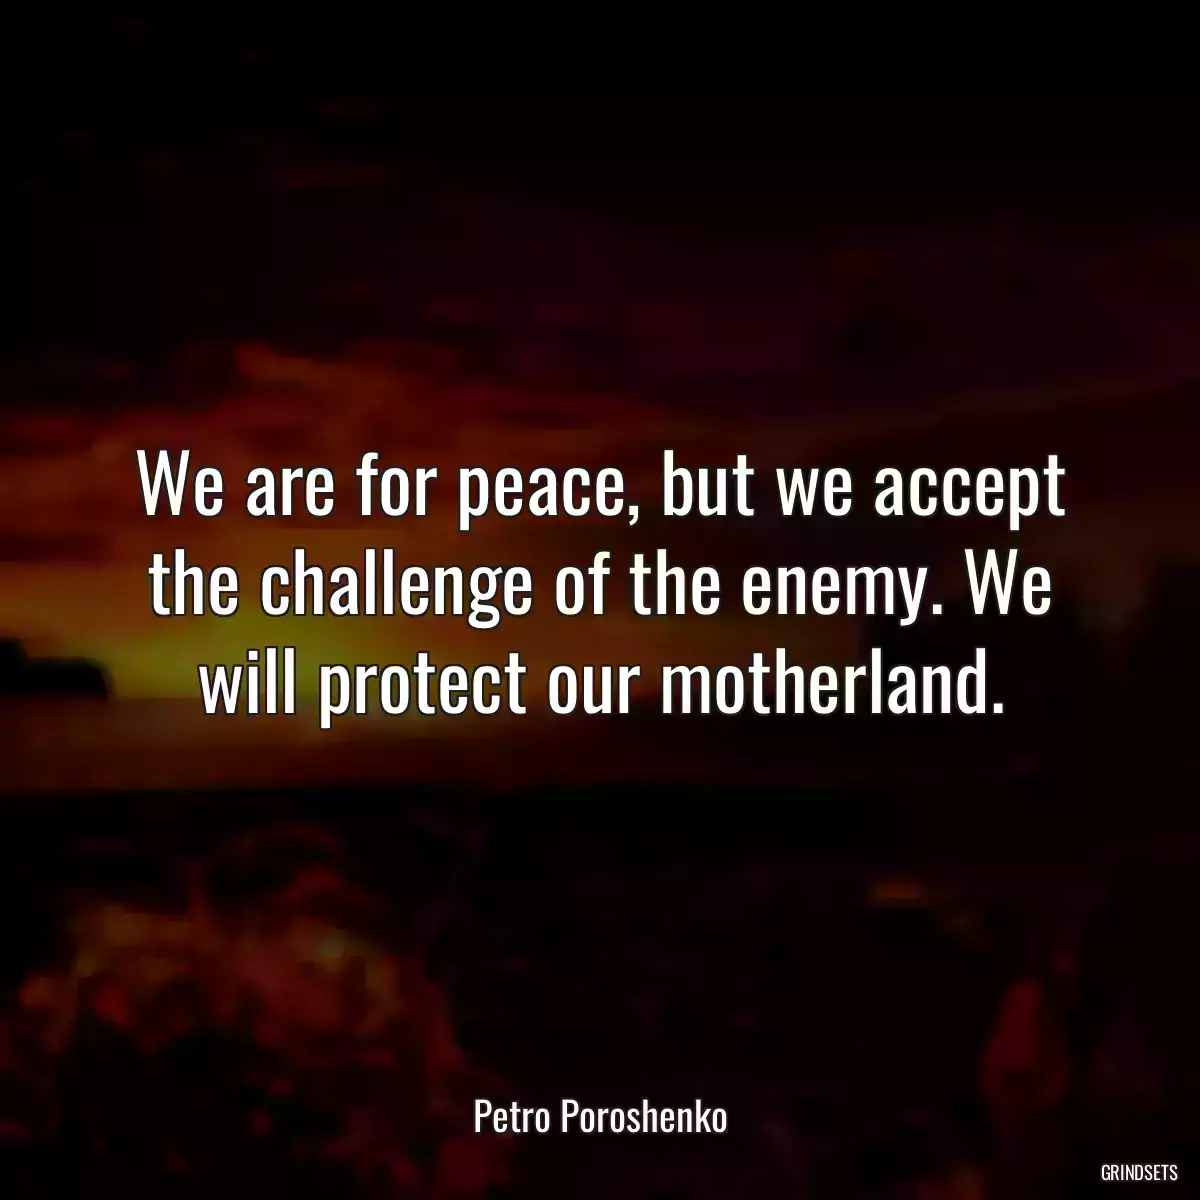 We are for peace, but we accept the challenge of the enemy. We will protect our motherland.